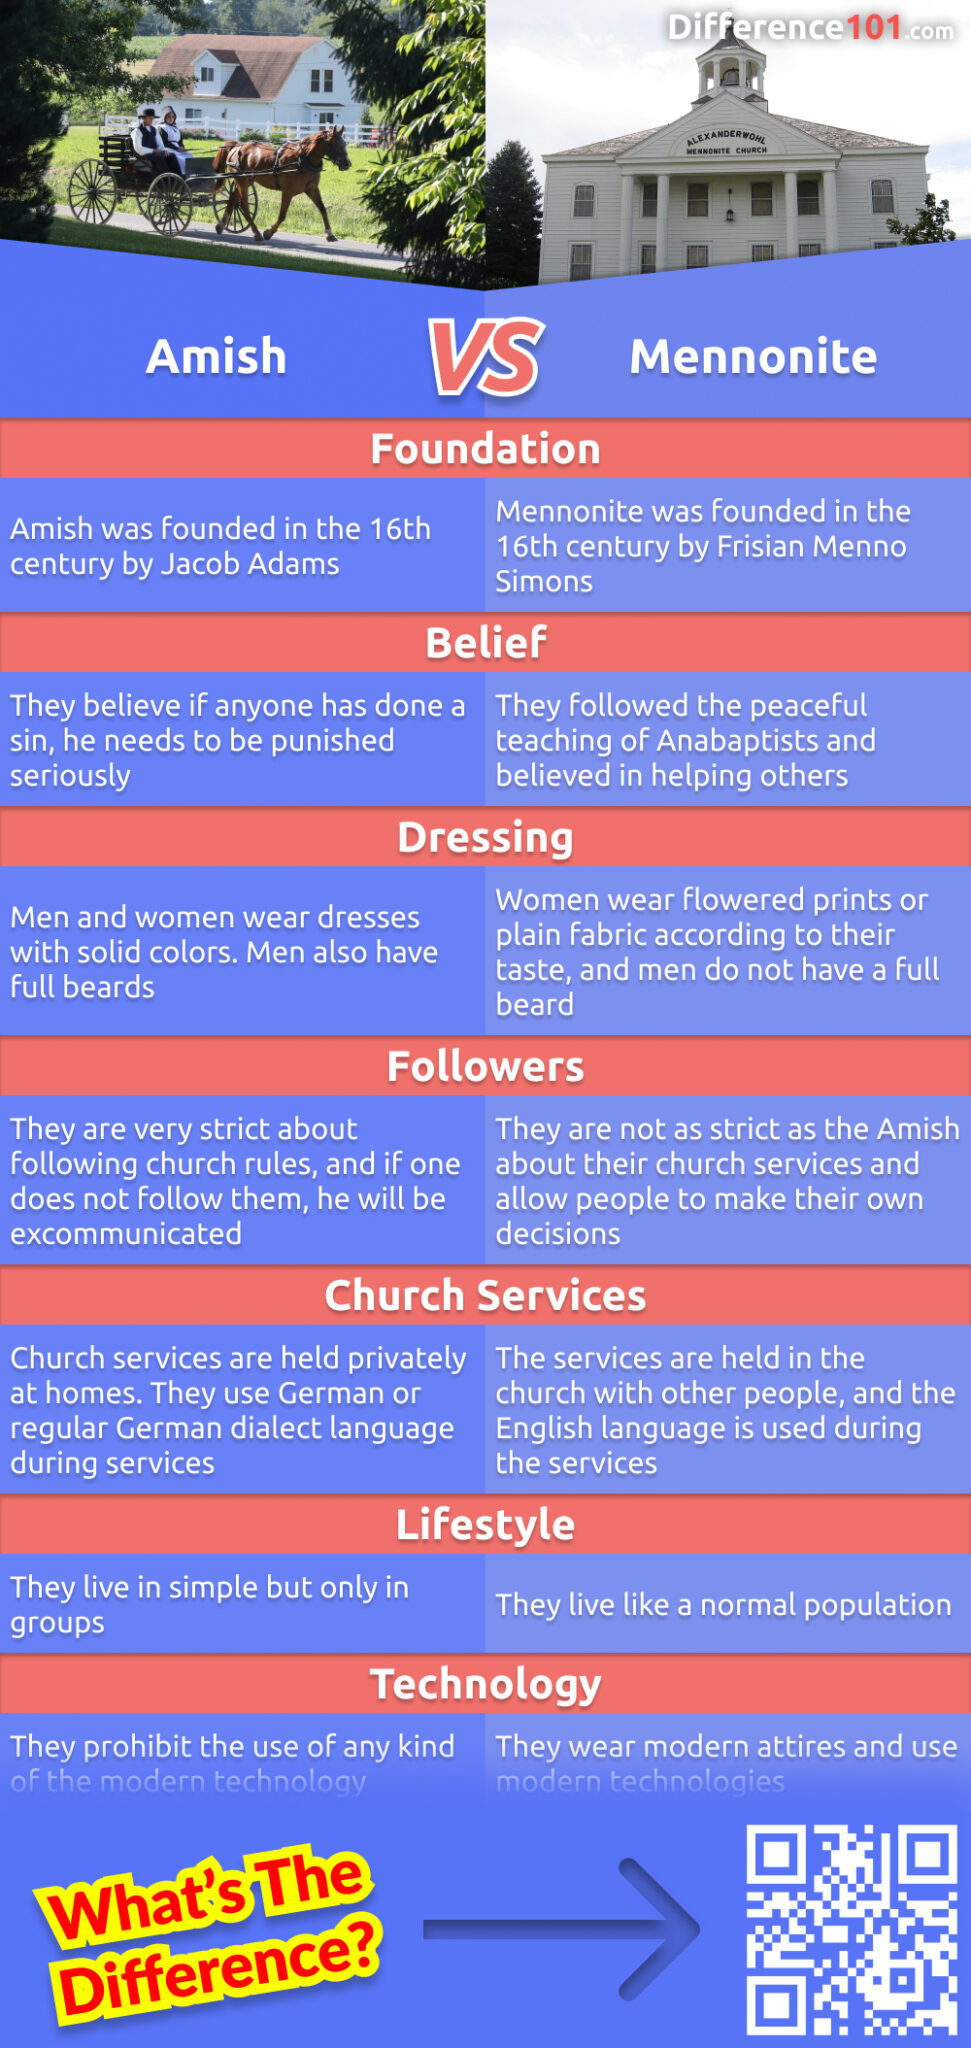 What are the key differences between Amish and Mennonite communities? Read on to learn about the similarities and differences between these two groups, as well as the pros and cons of each.